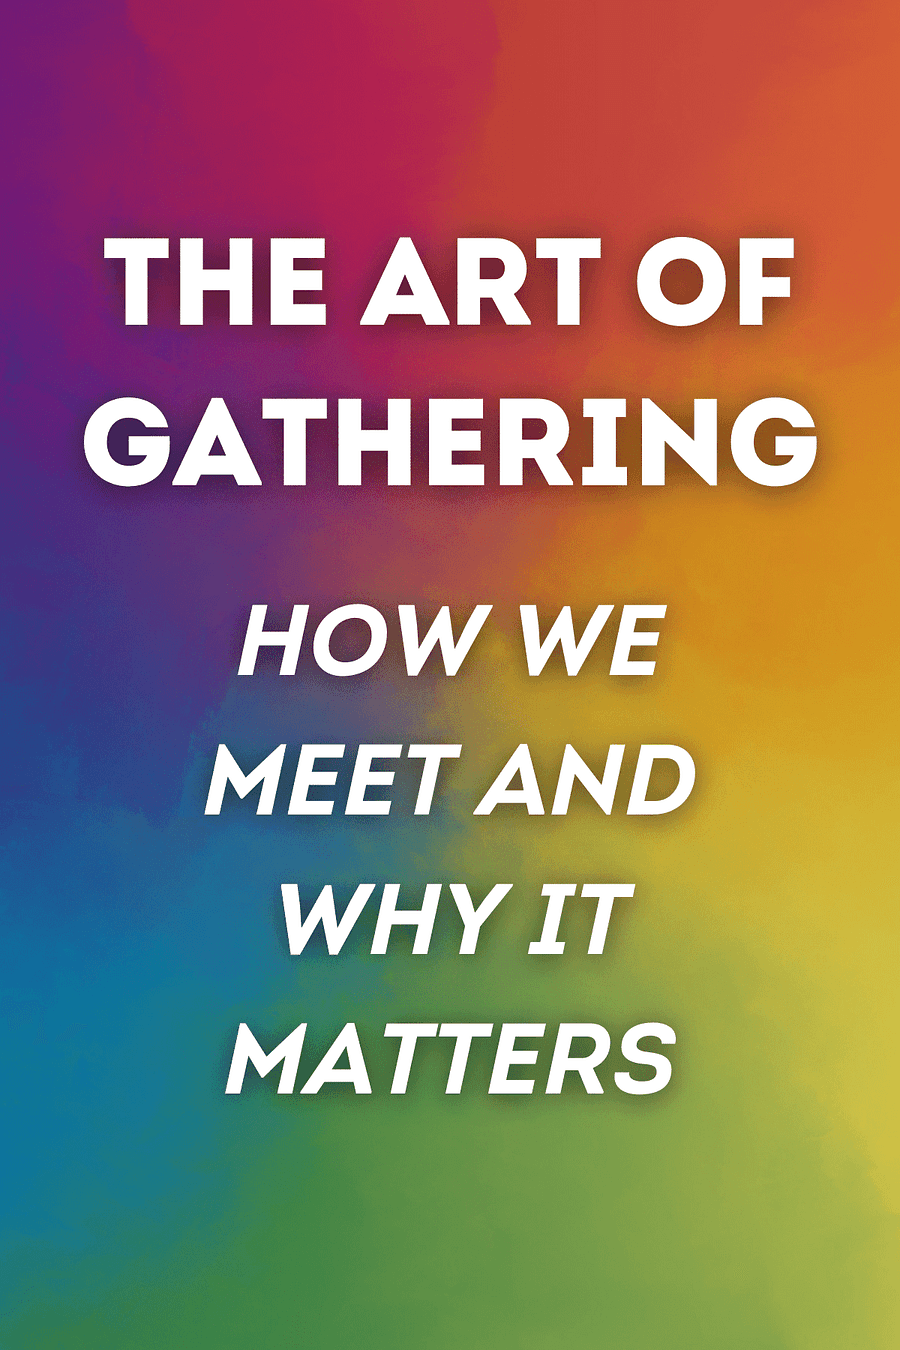 The Art of Gathering by Priya Parker - Book Summary